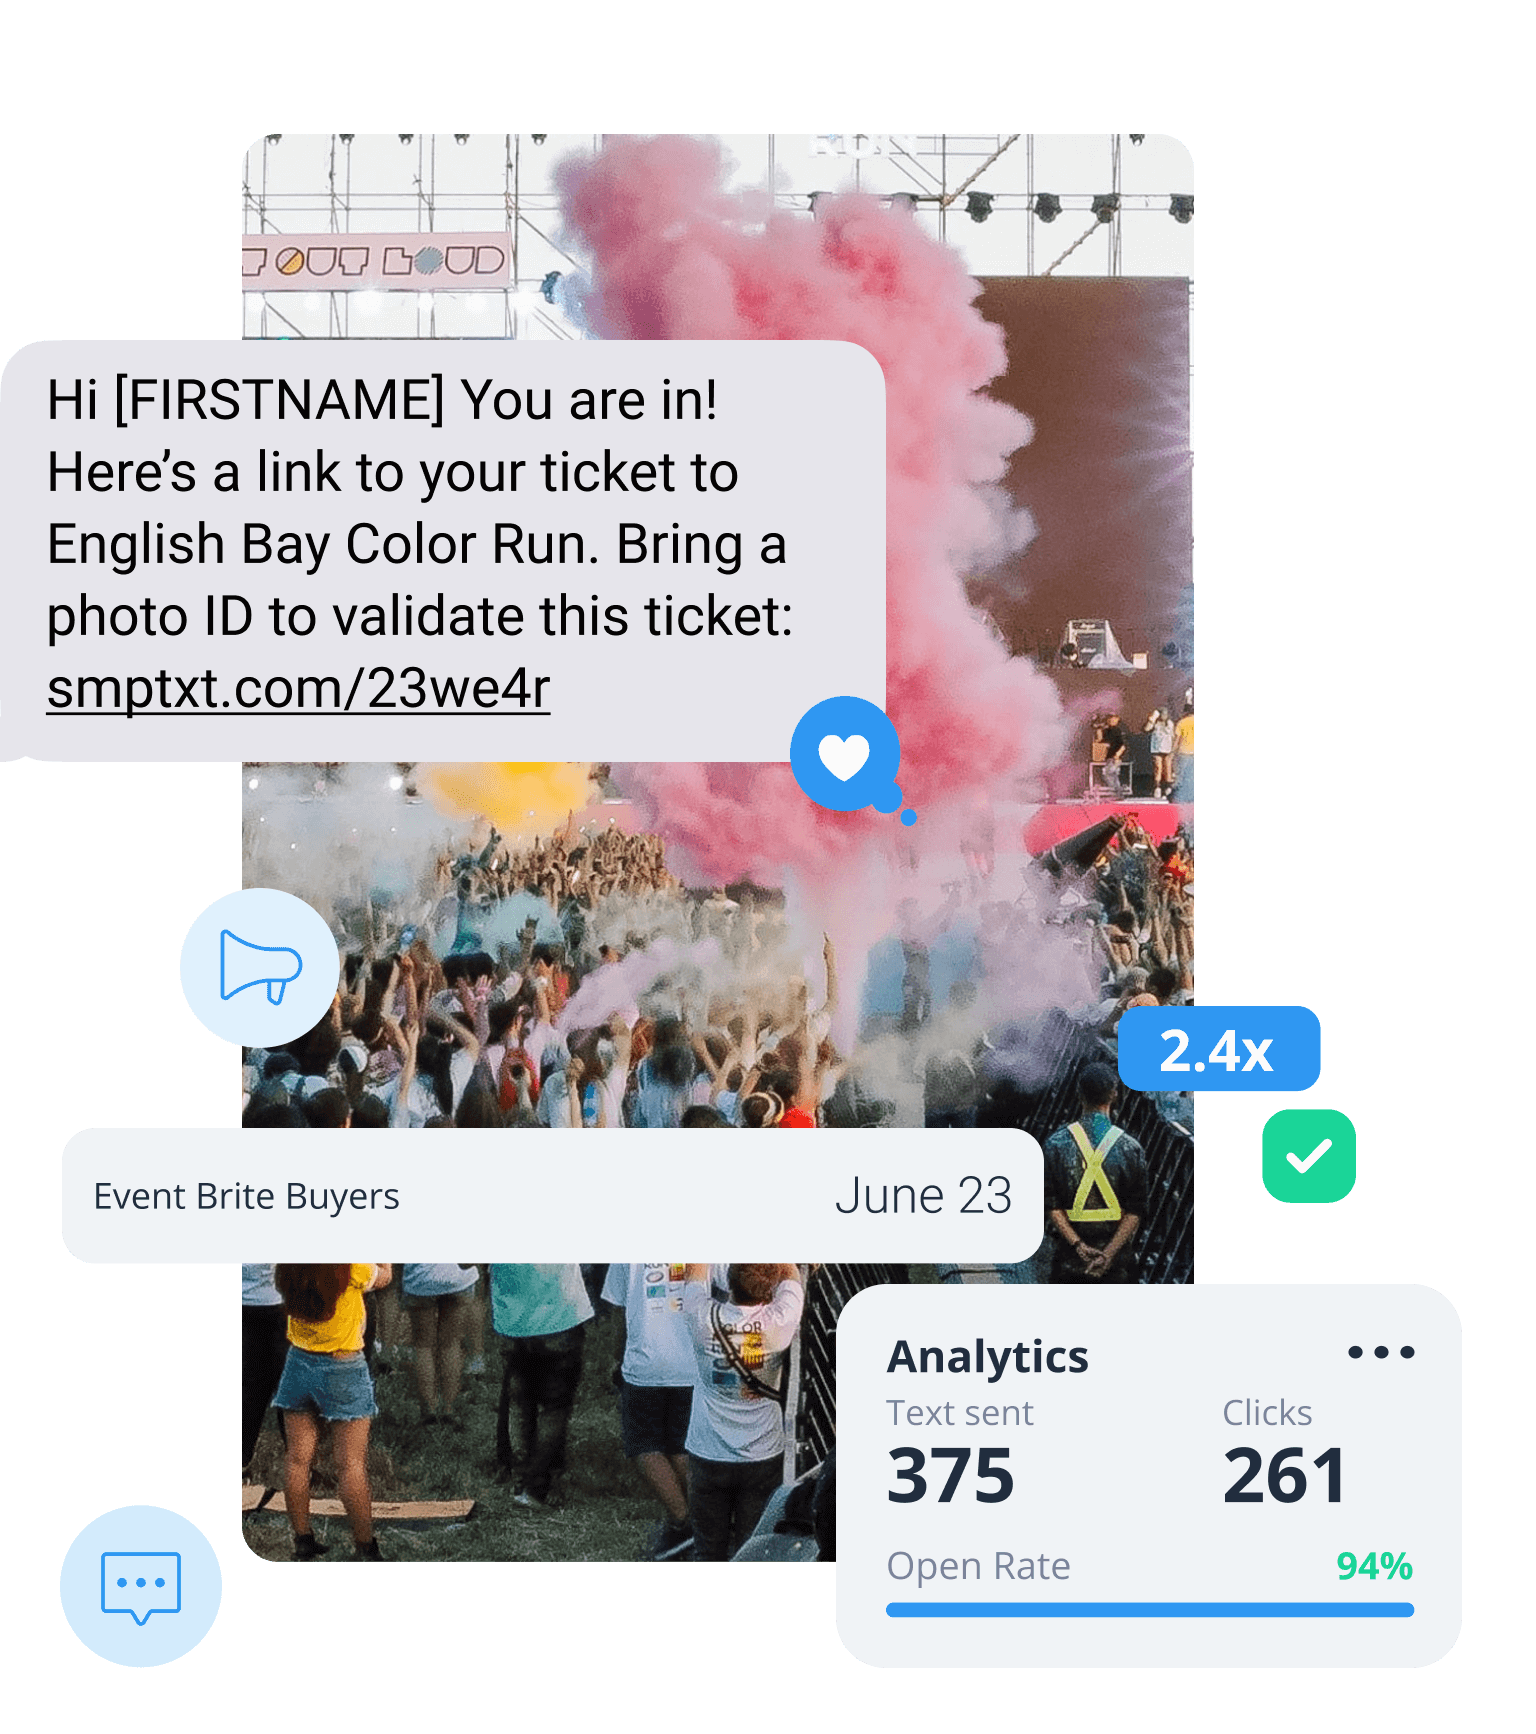 A crowd cheers as pink smoke fills an outdoor festival. A text message bubble above the crowd reads 